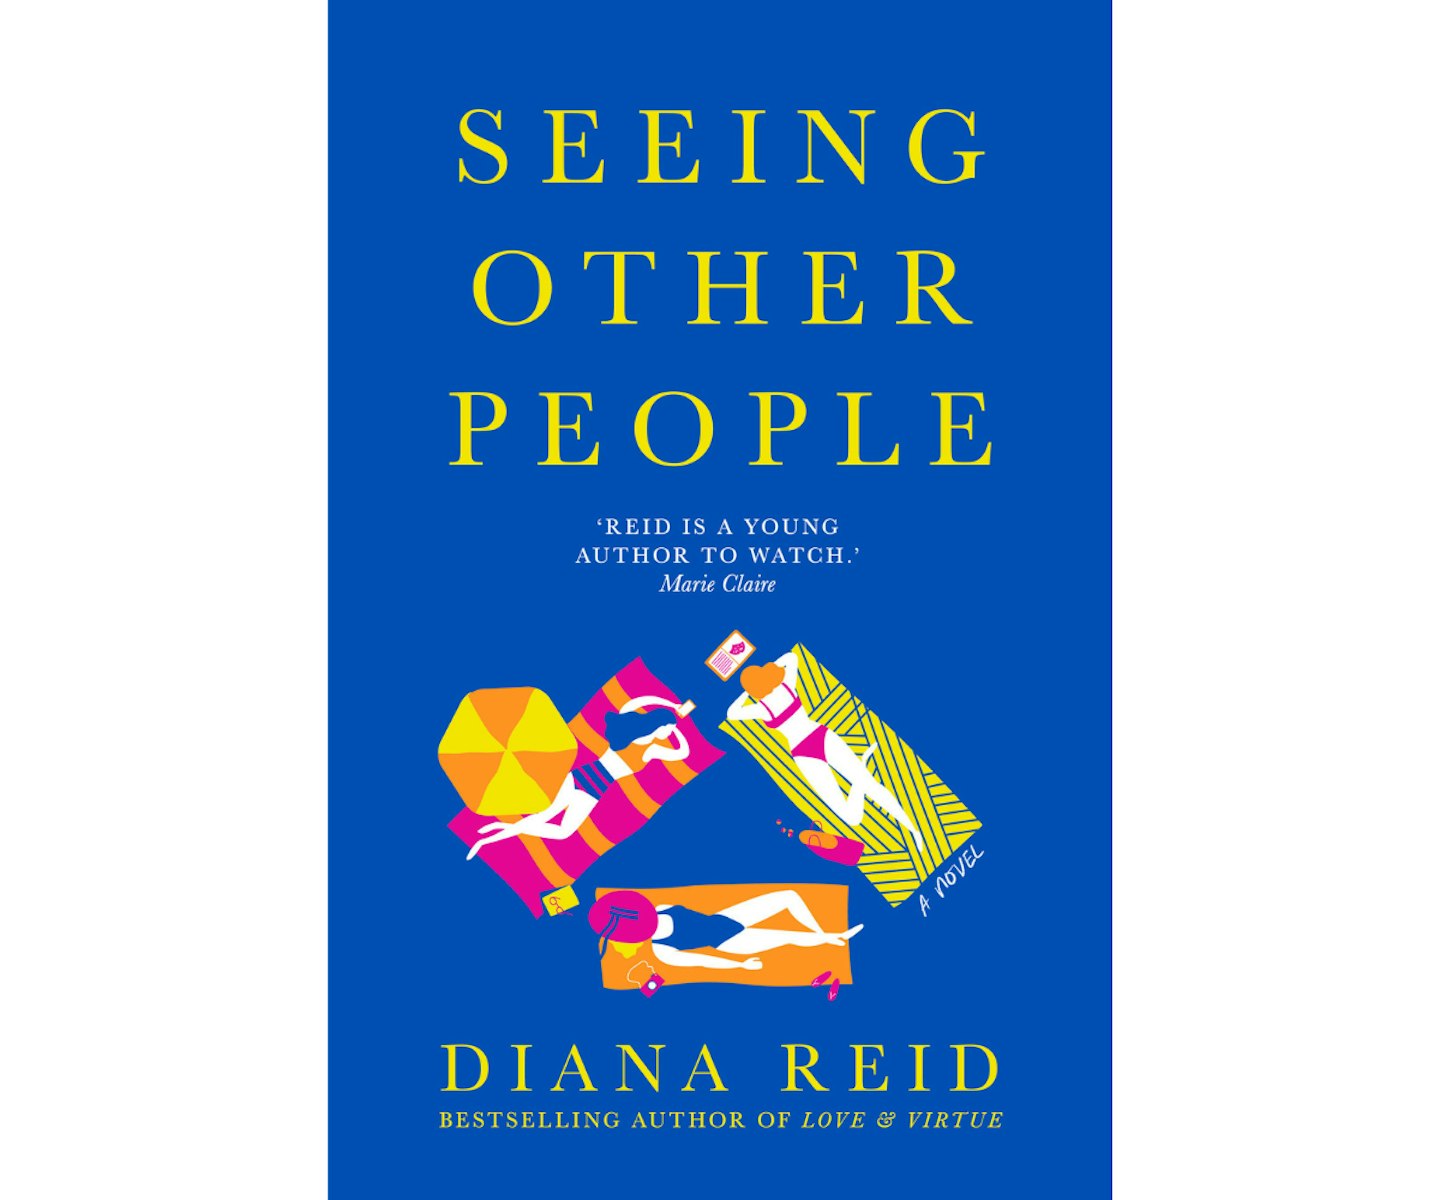 Seeing Other People by Diana Reid